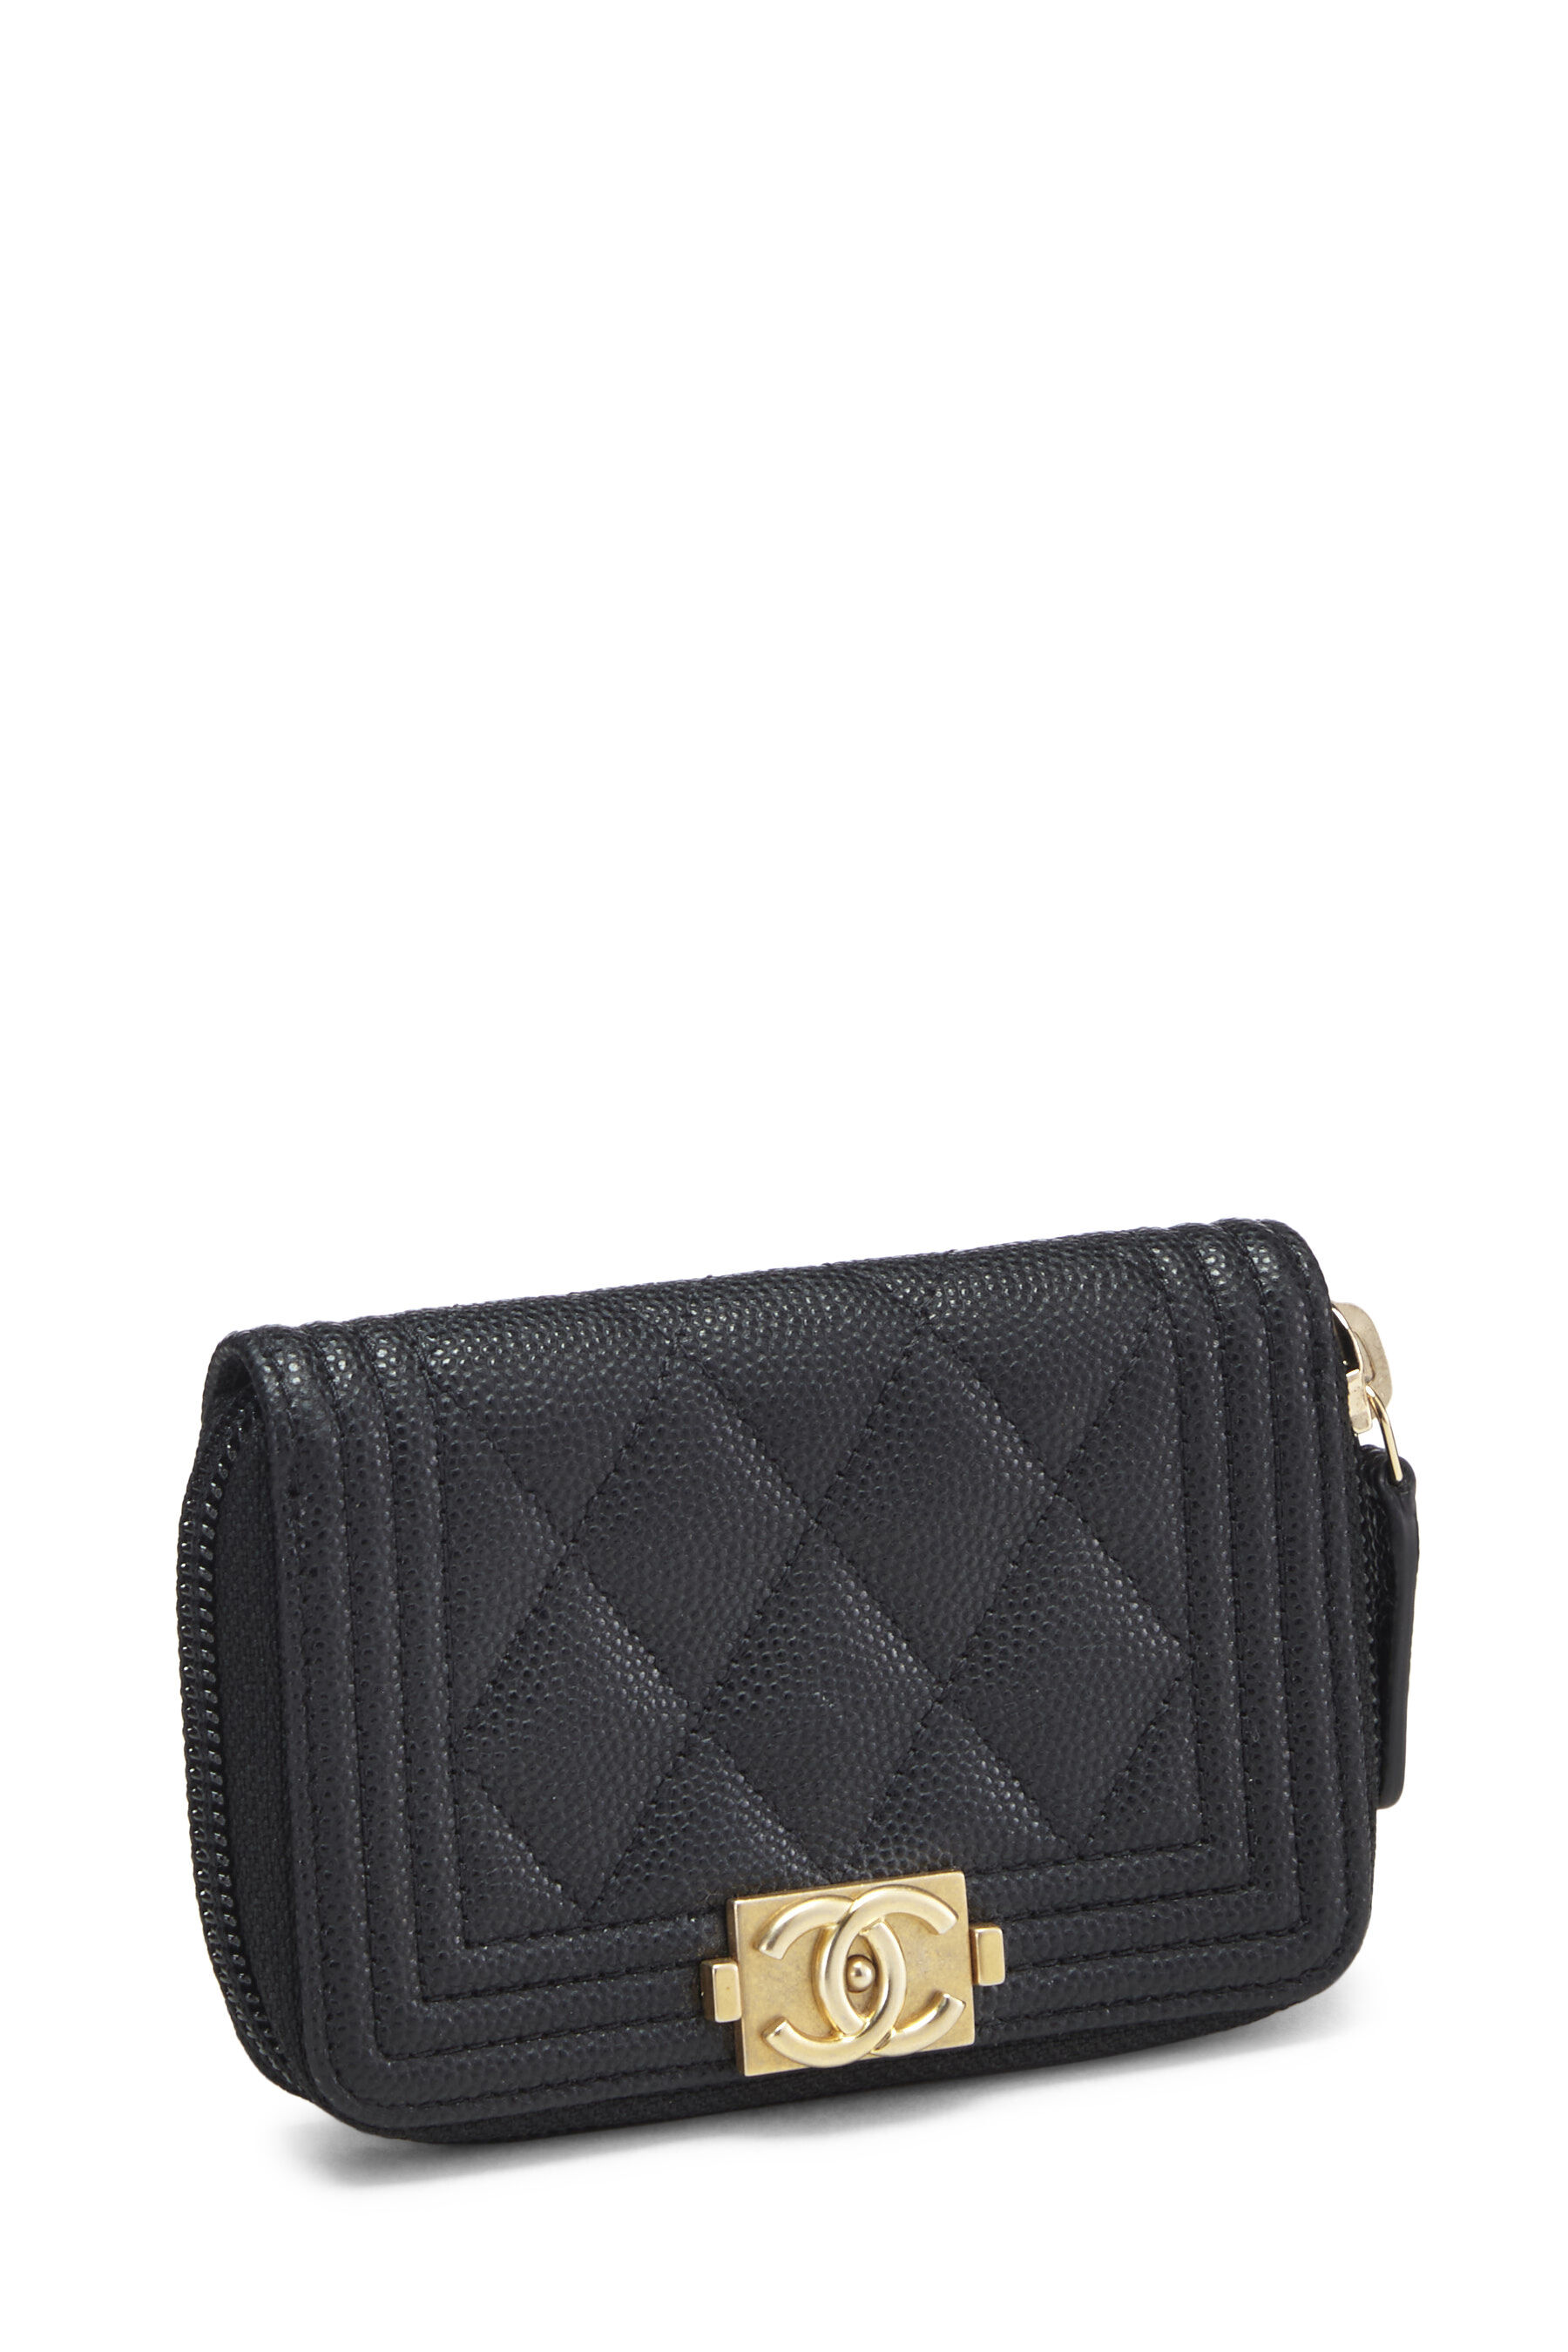 CHANEL Caviar Quilted Boy Small Zip Around Wallet Black 1281763